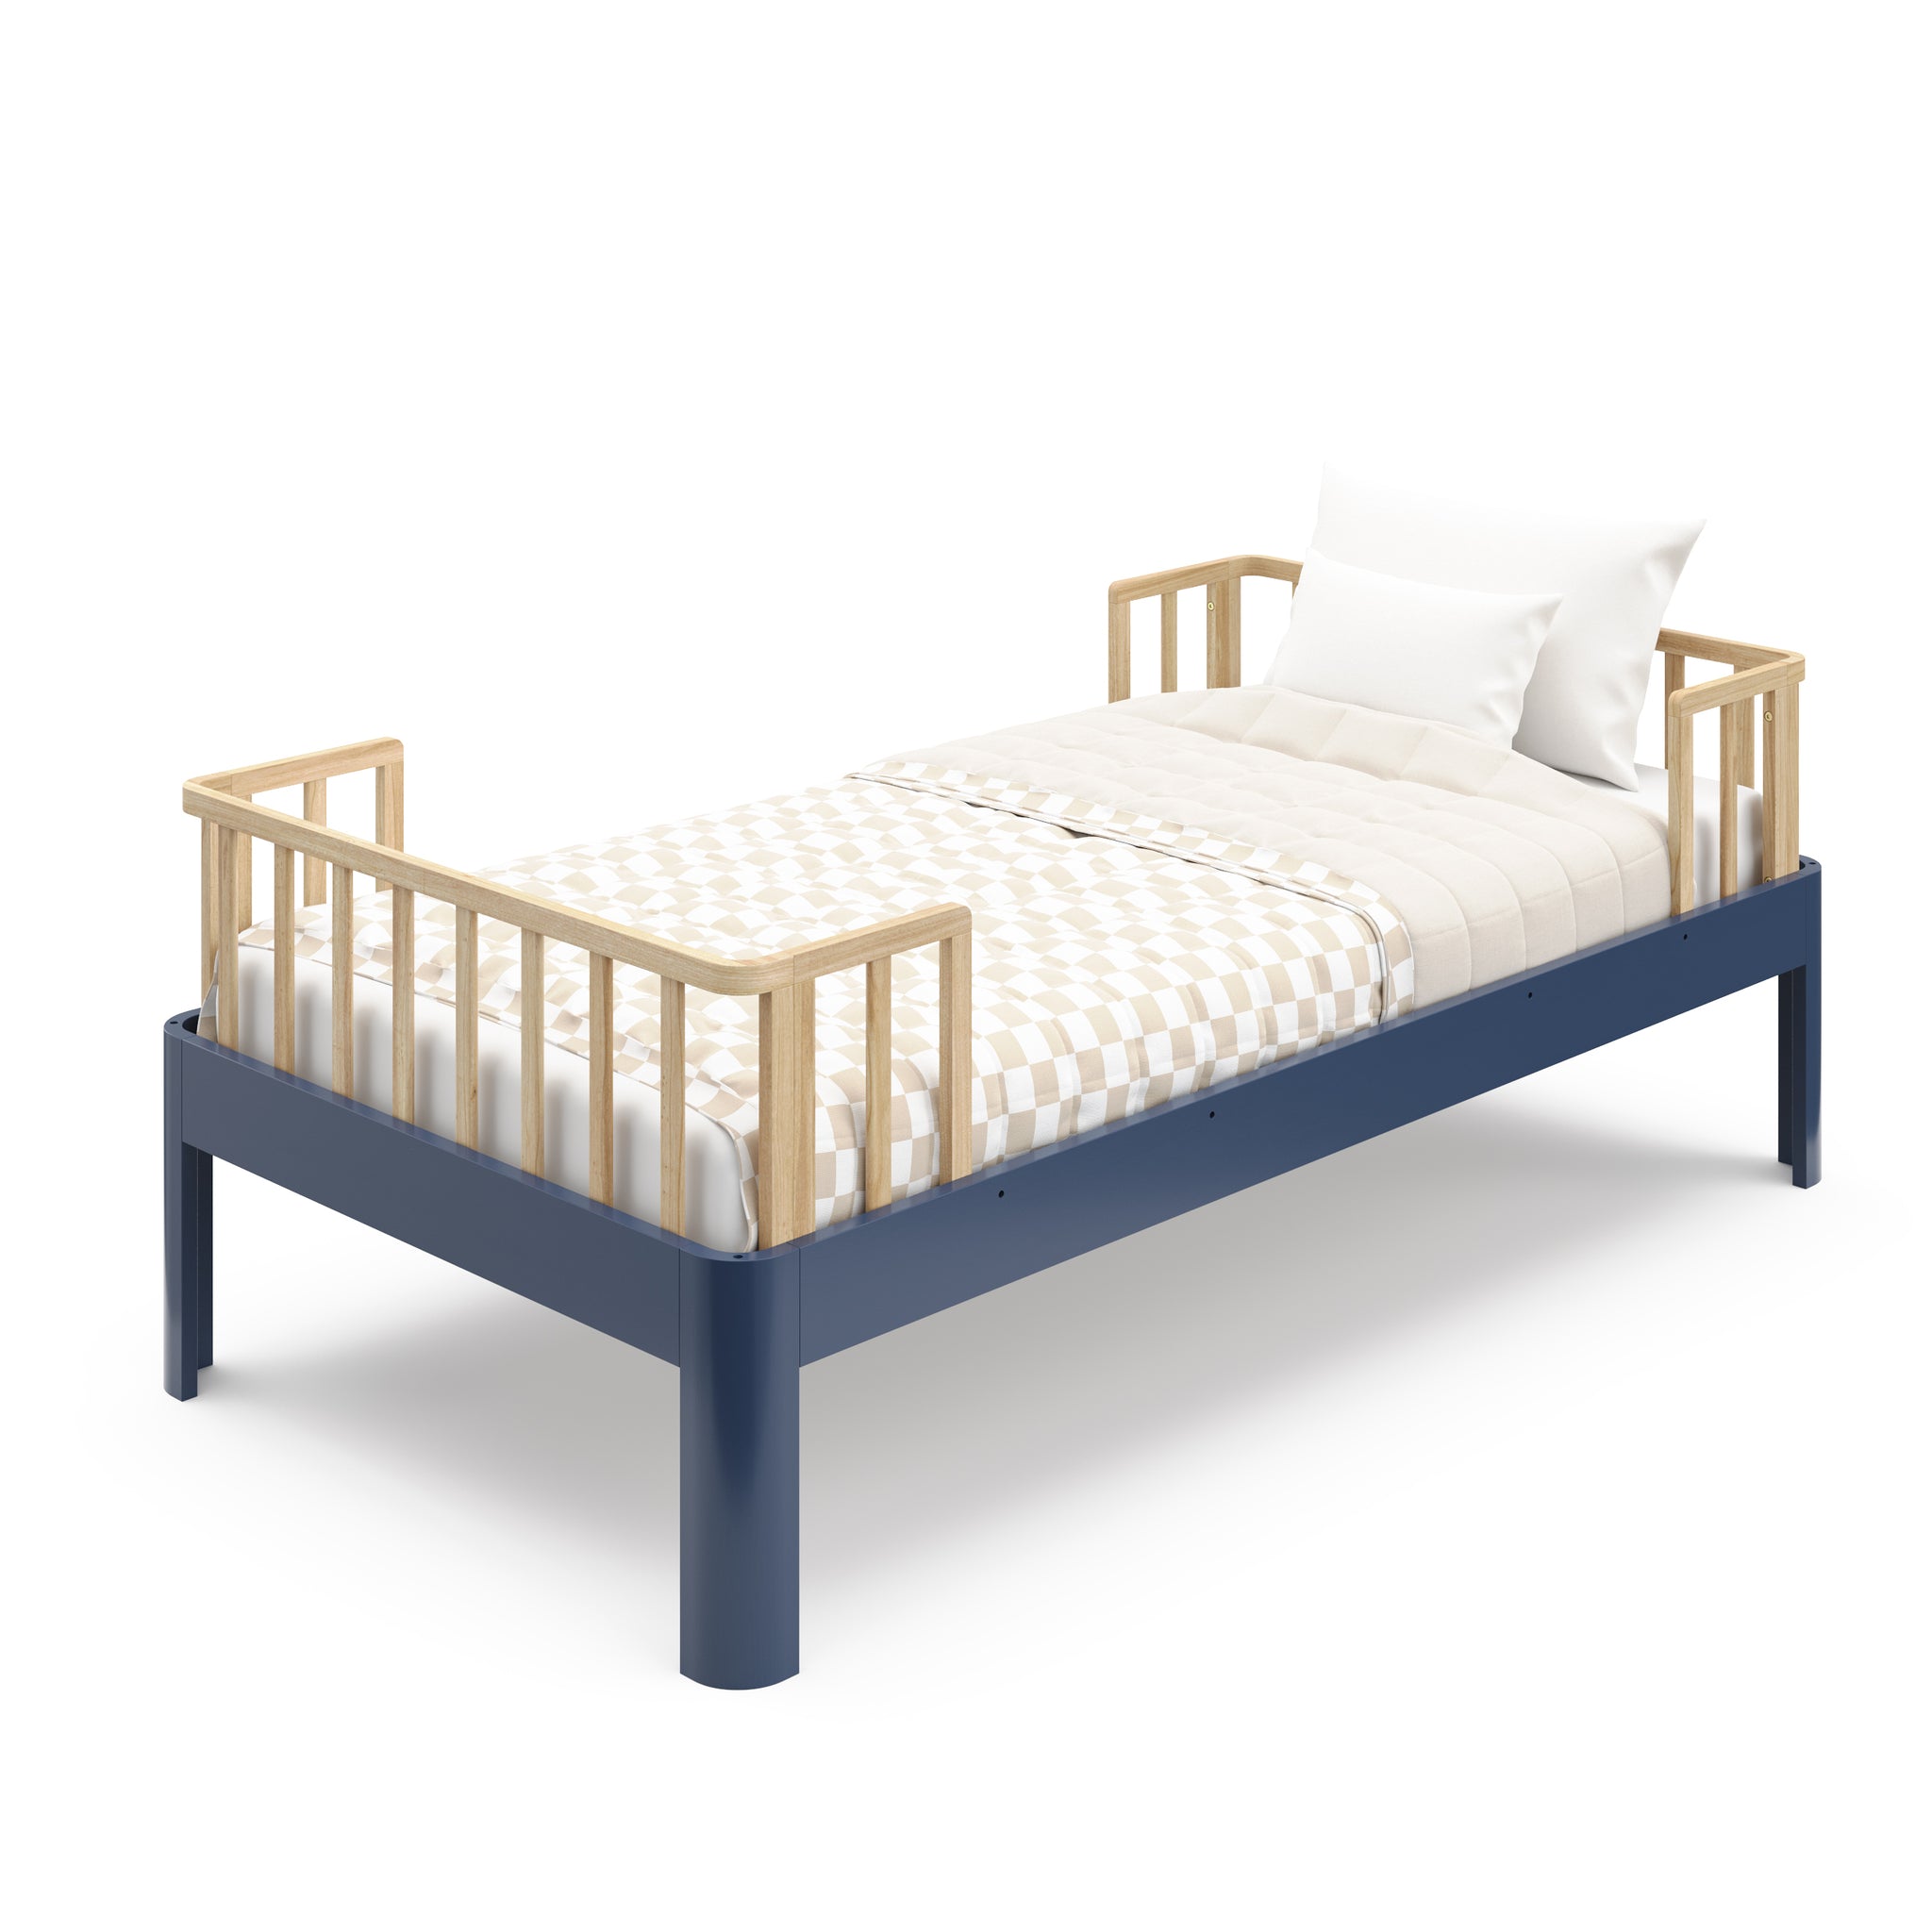 Close up view of natural wood  and blue twin bed